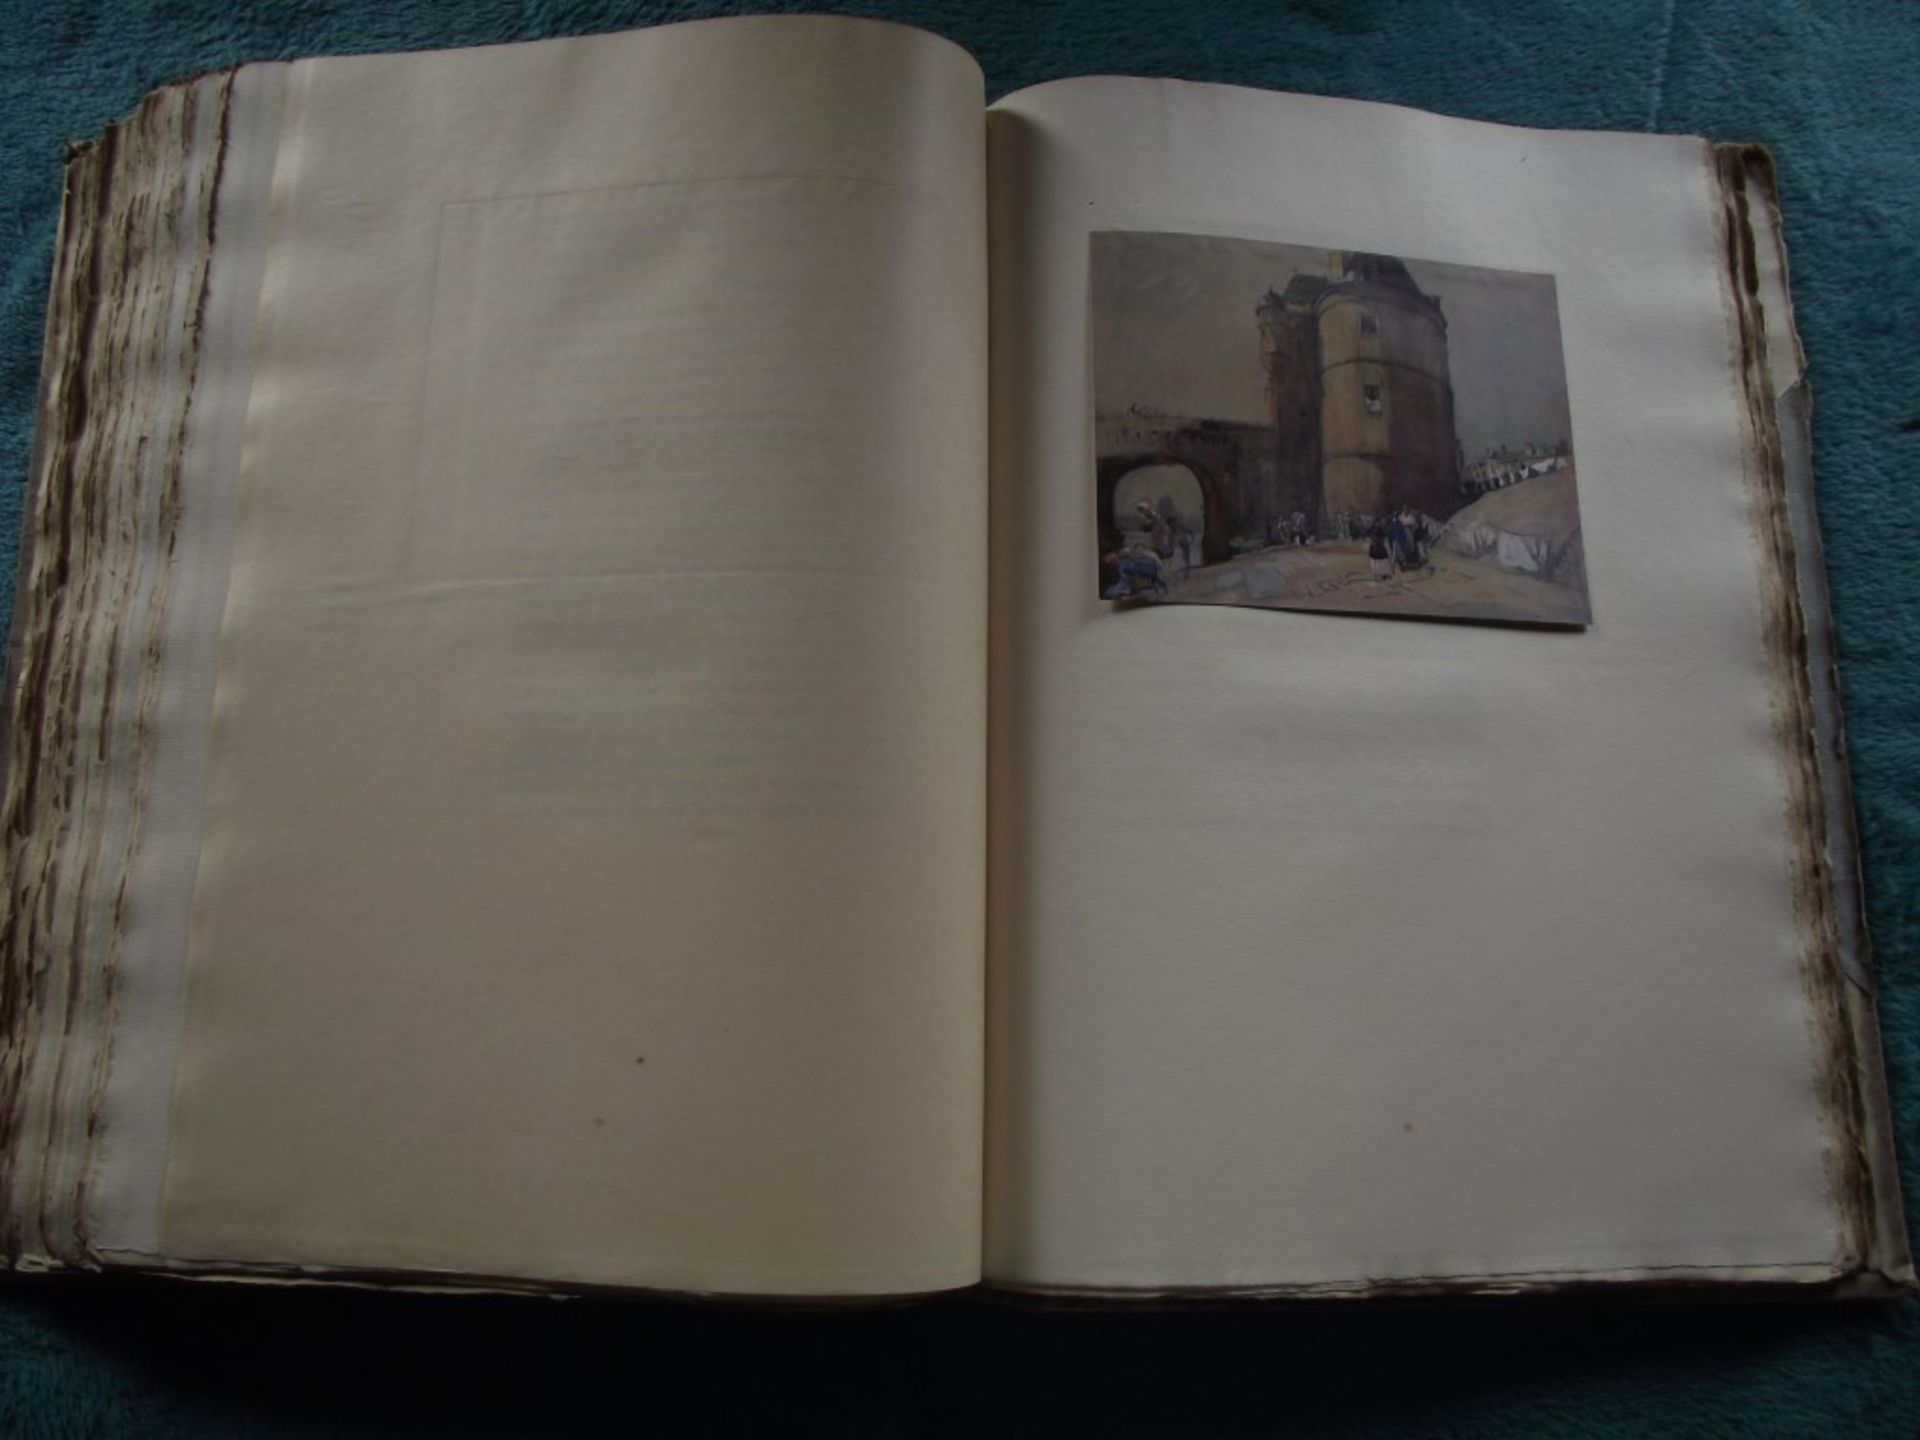 A Book of Bridges by Frank Brangwyn & Walter Shaw Sparrow - Ltd. Edit. 17/75 with Signed Lithograph. - Image 57 of 64